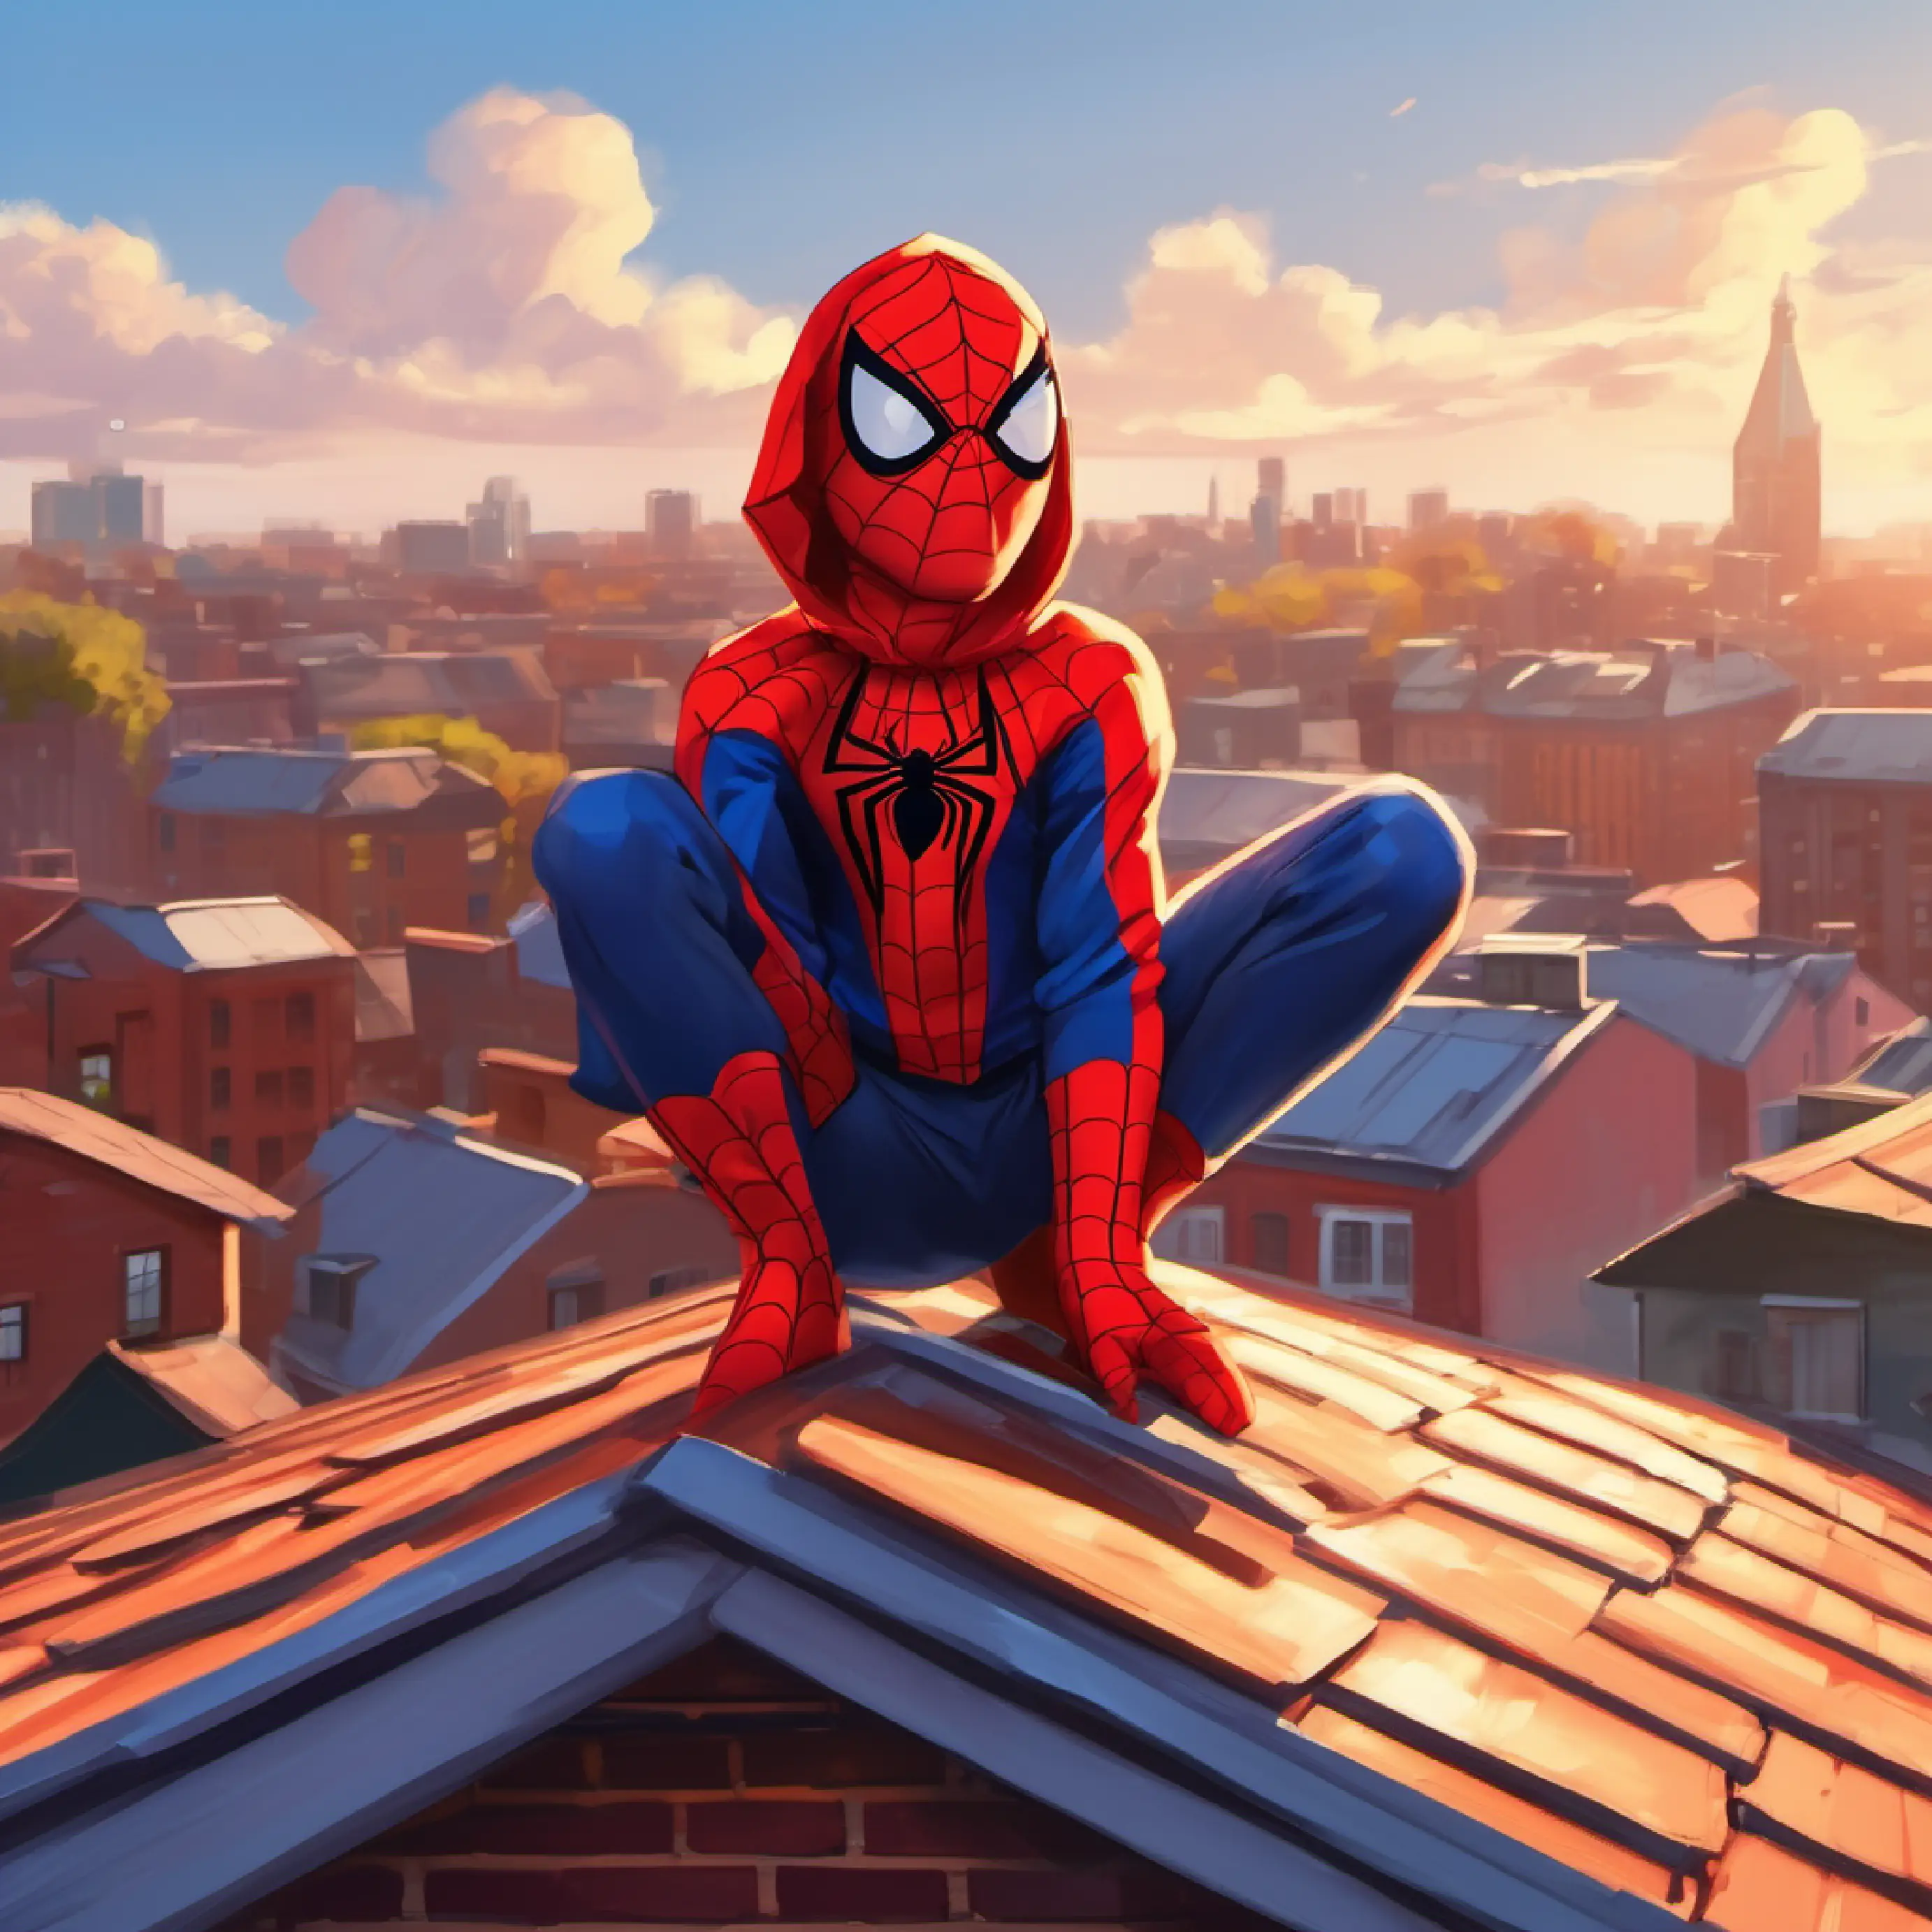 a young boy in a spiderman outfit on a roof